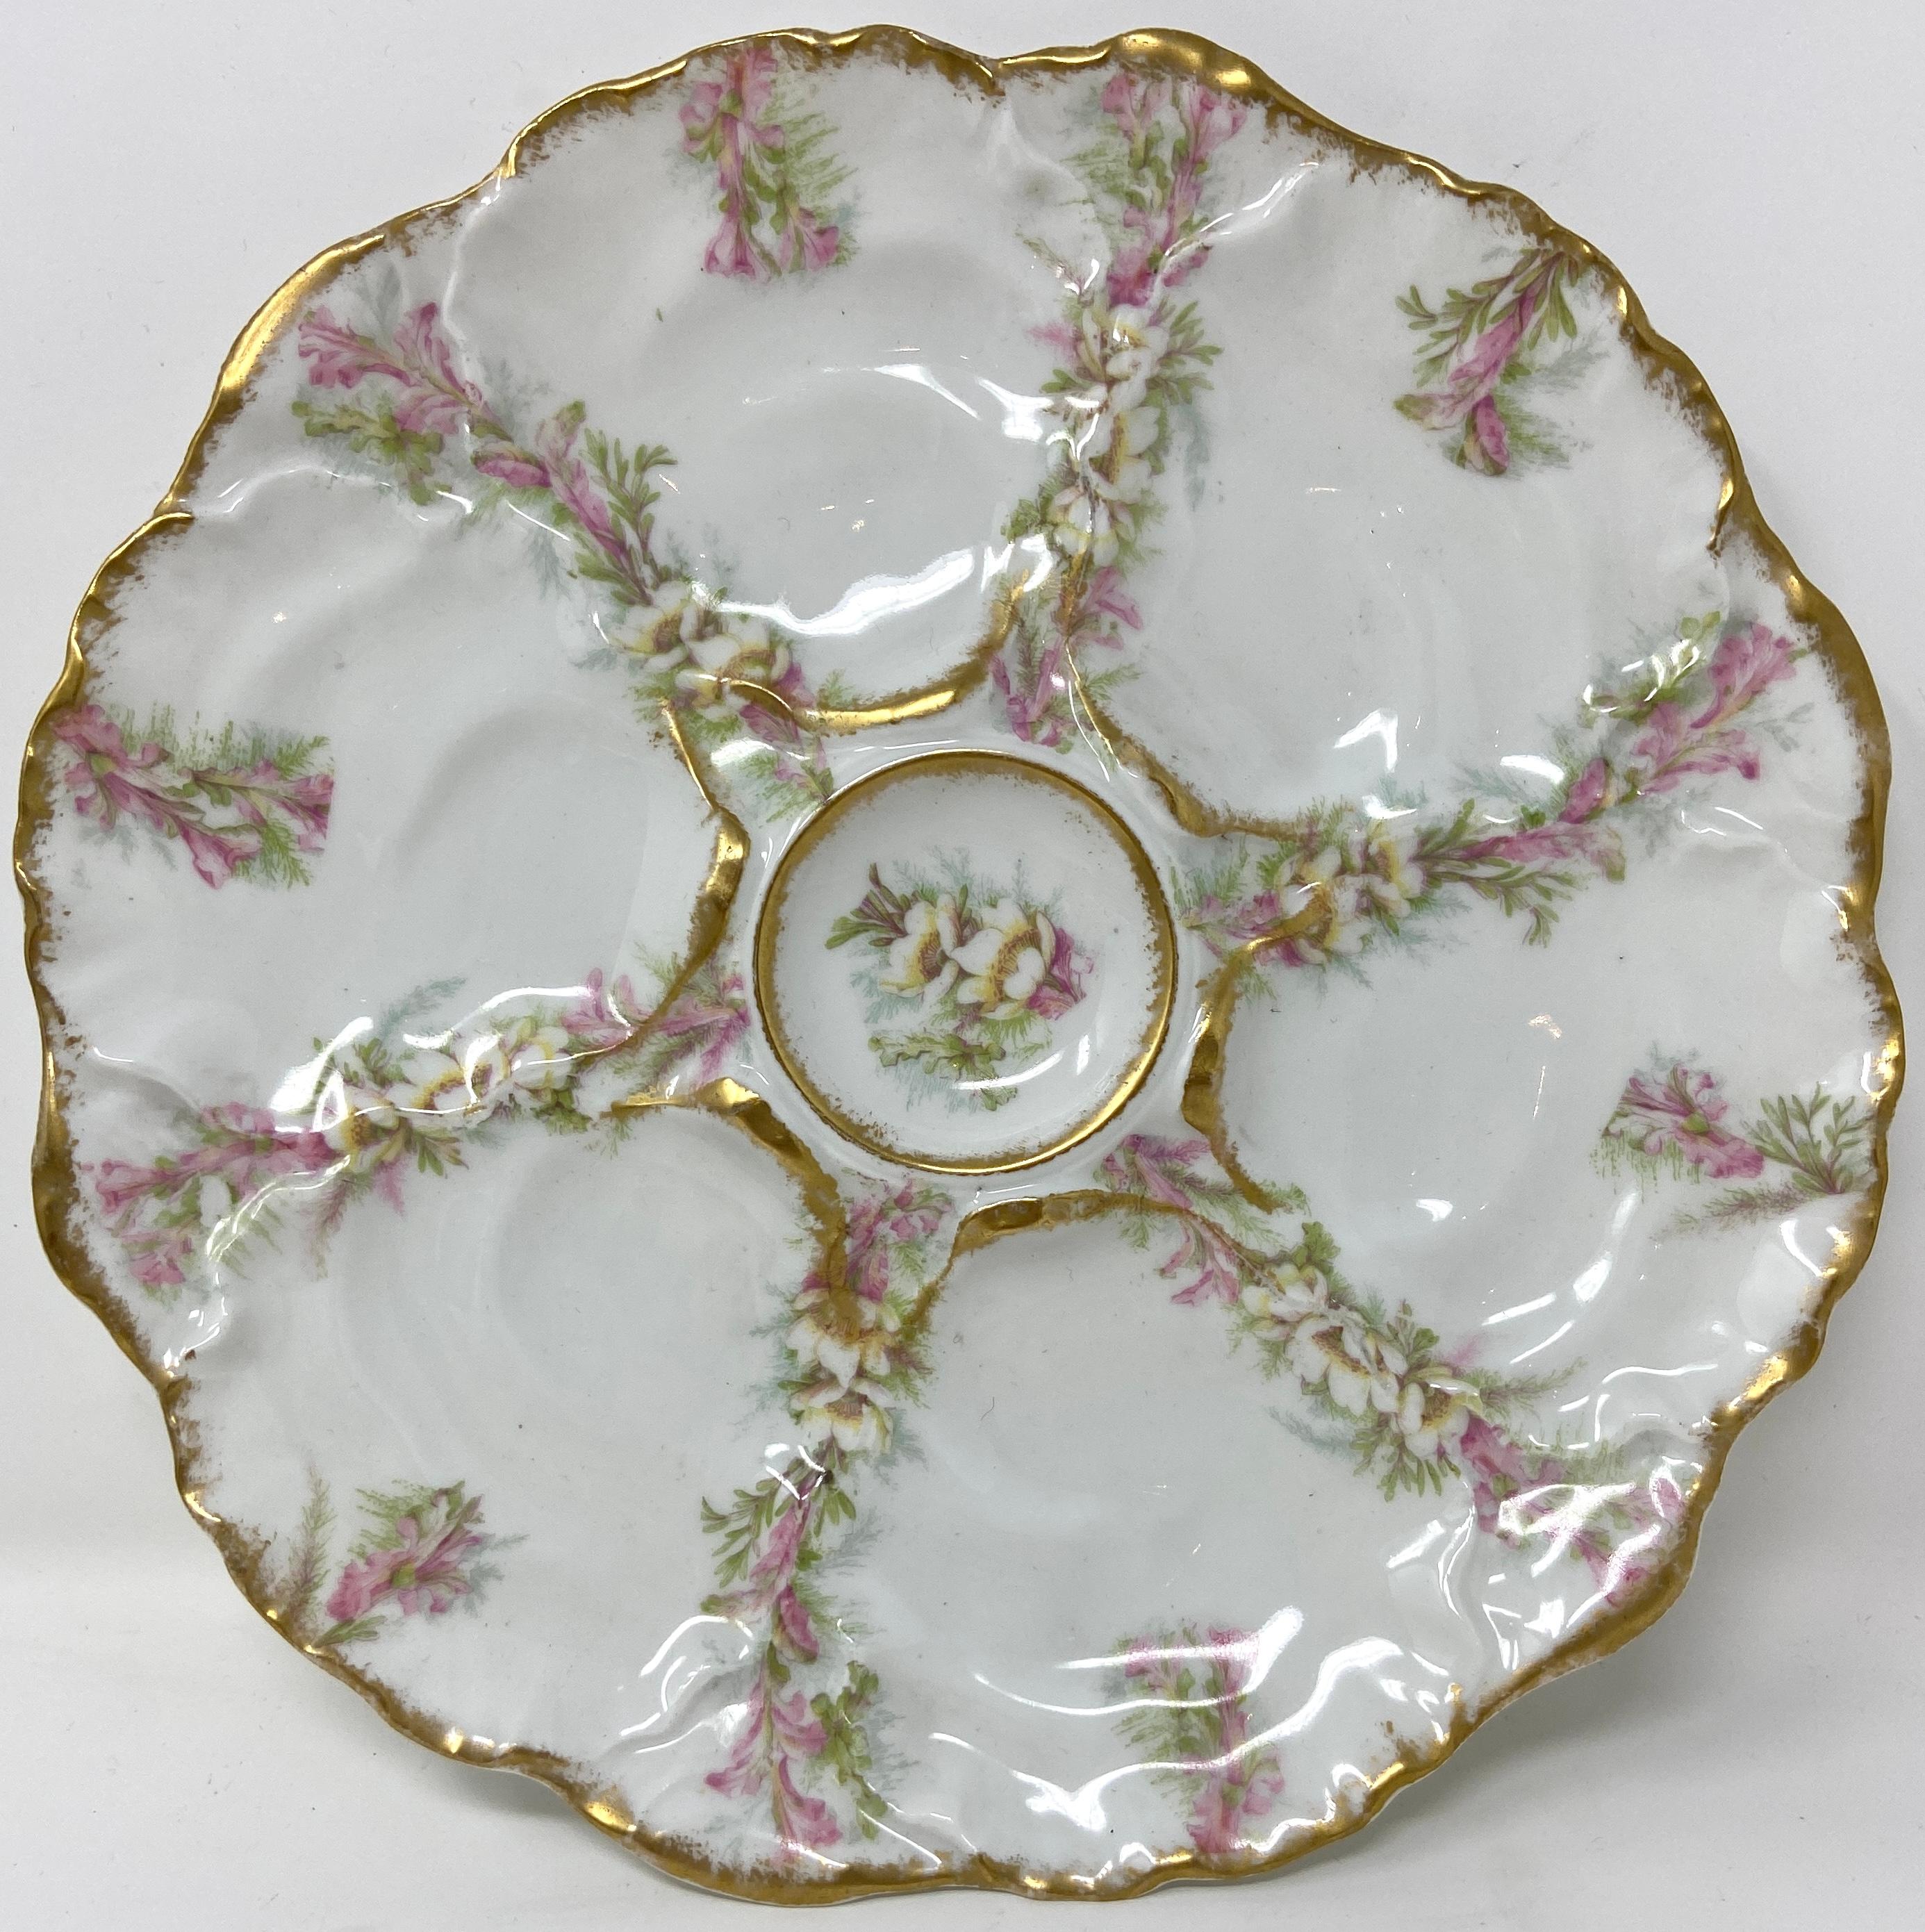 Set of 12 antique French limoges porcelain oyster plates, circa 1890-1900.